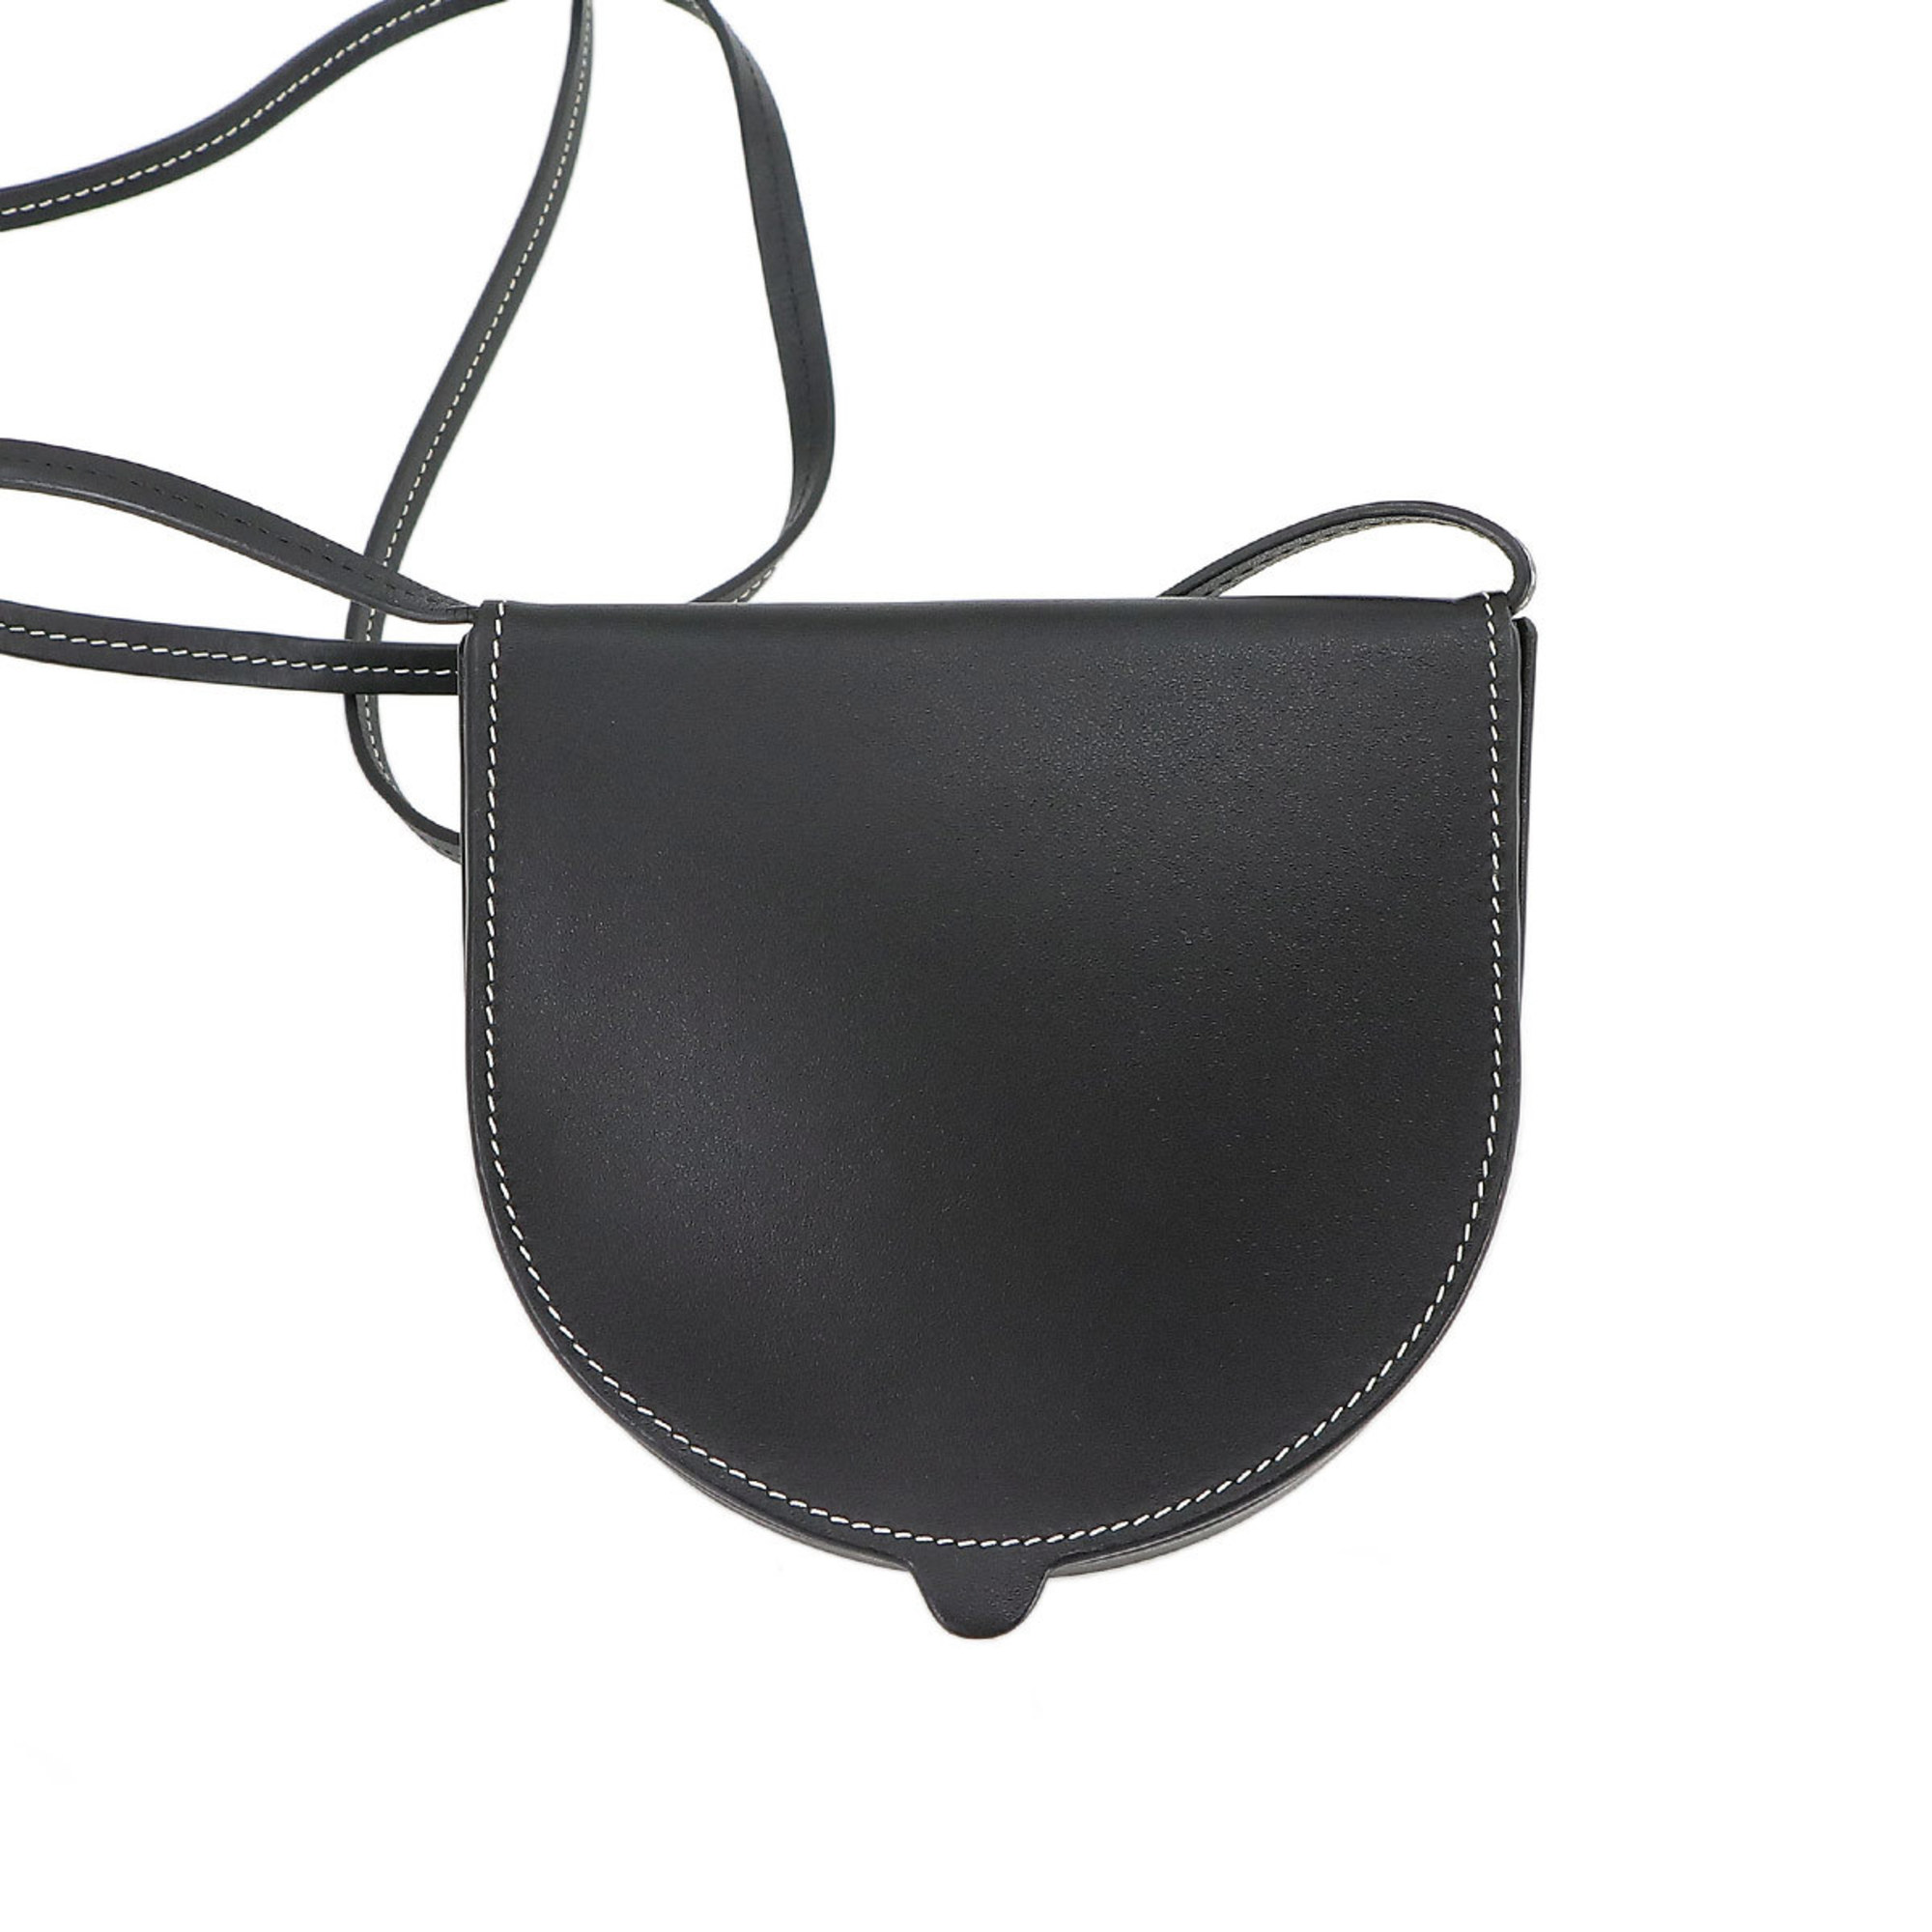 LOEWE Heel pouch Small Shoulder bag Leather Black 109.54.T14